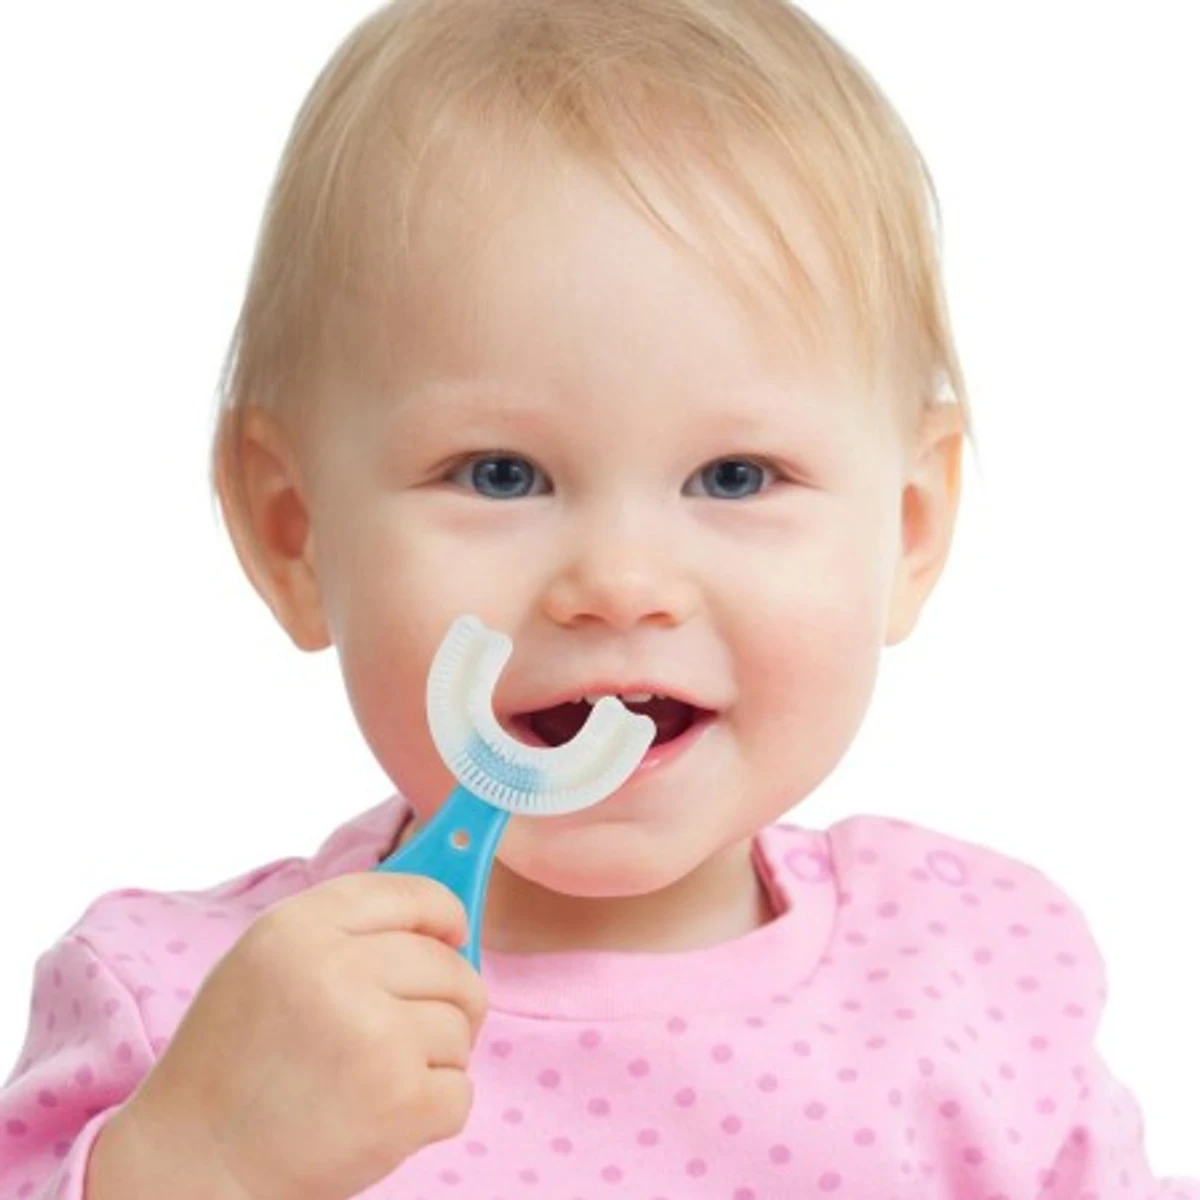 Children Toothbrush U-Shape Baby Toothbrush With Handle Silicone Oral Care Cleaning Brush For Kids Supplies